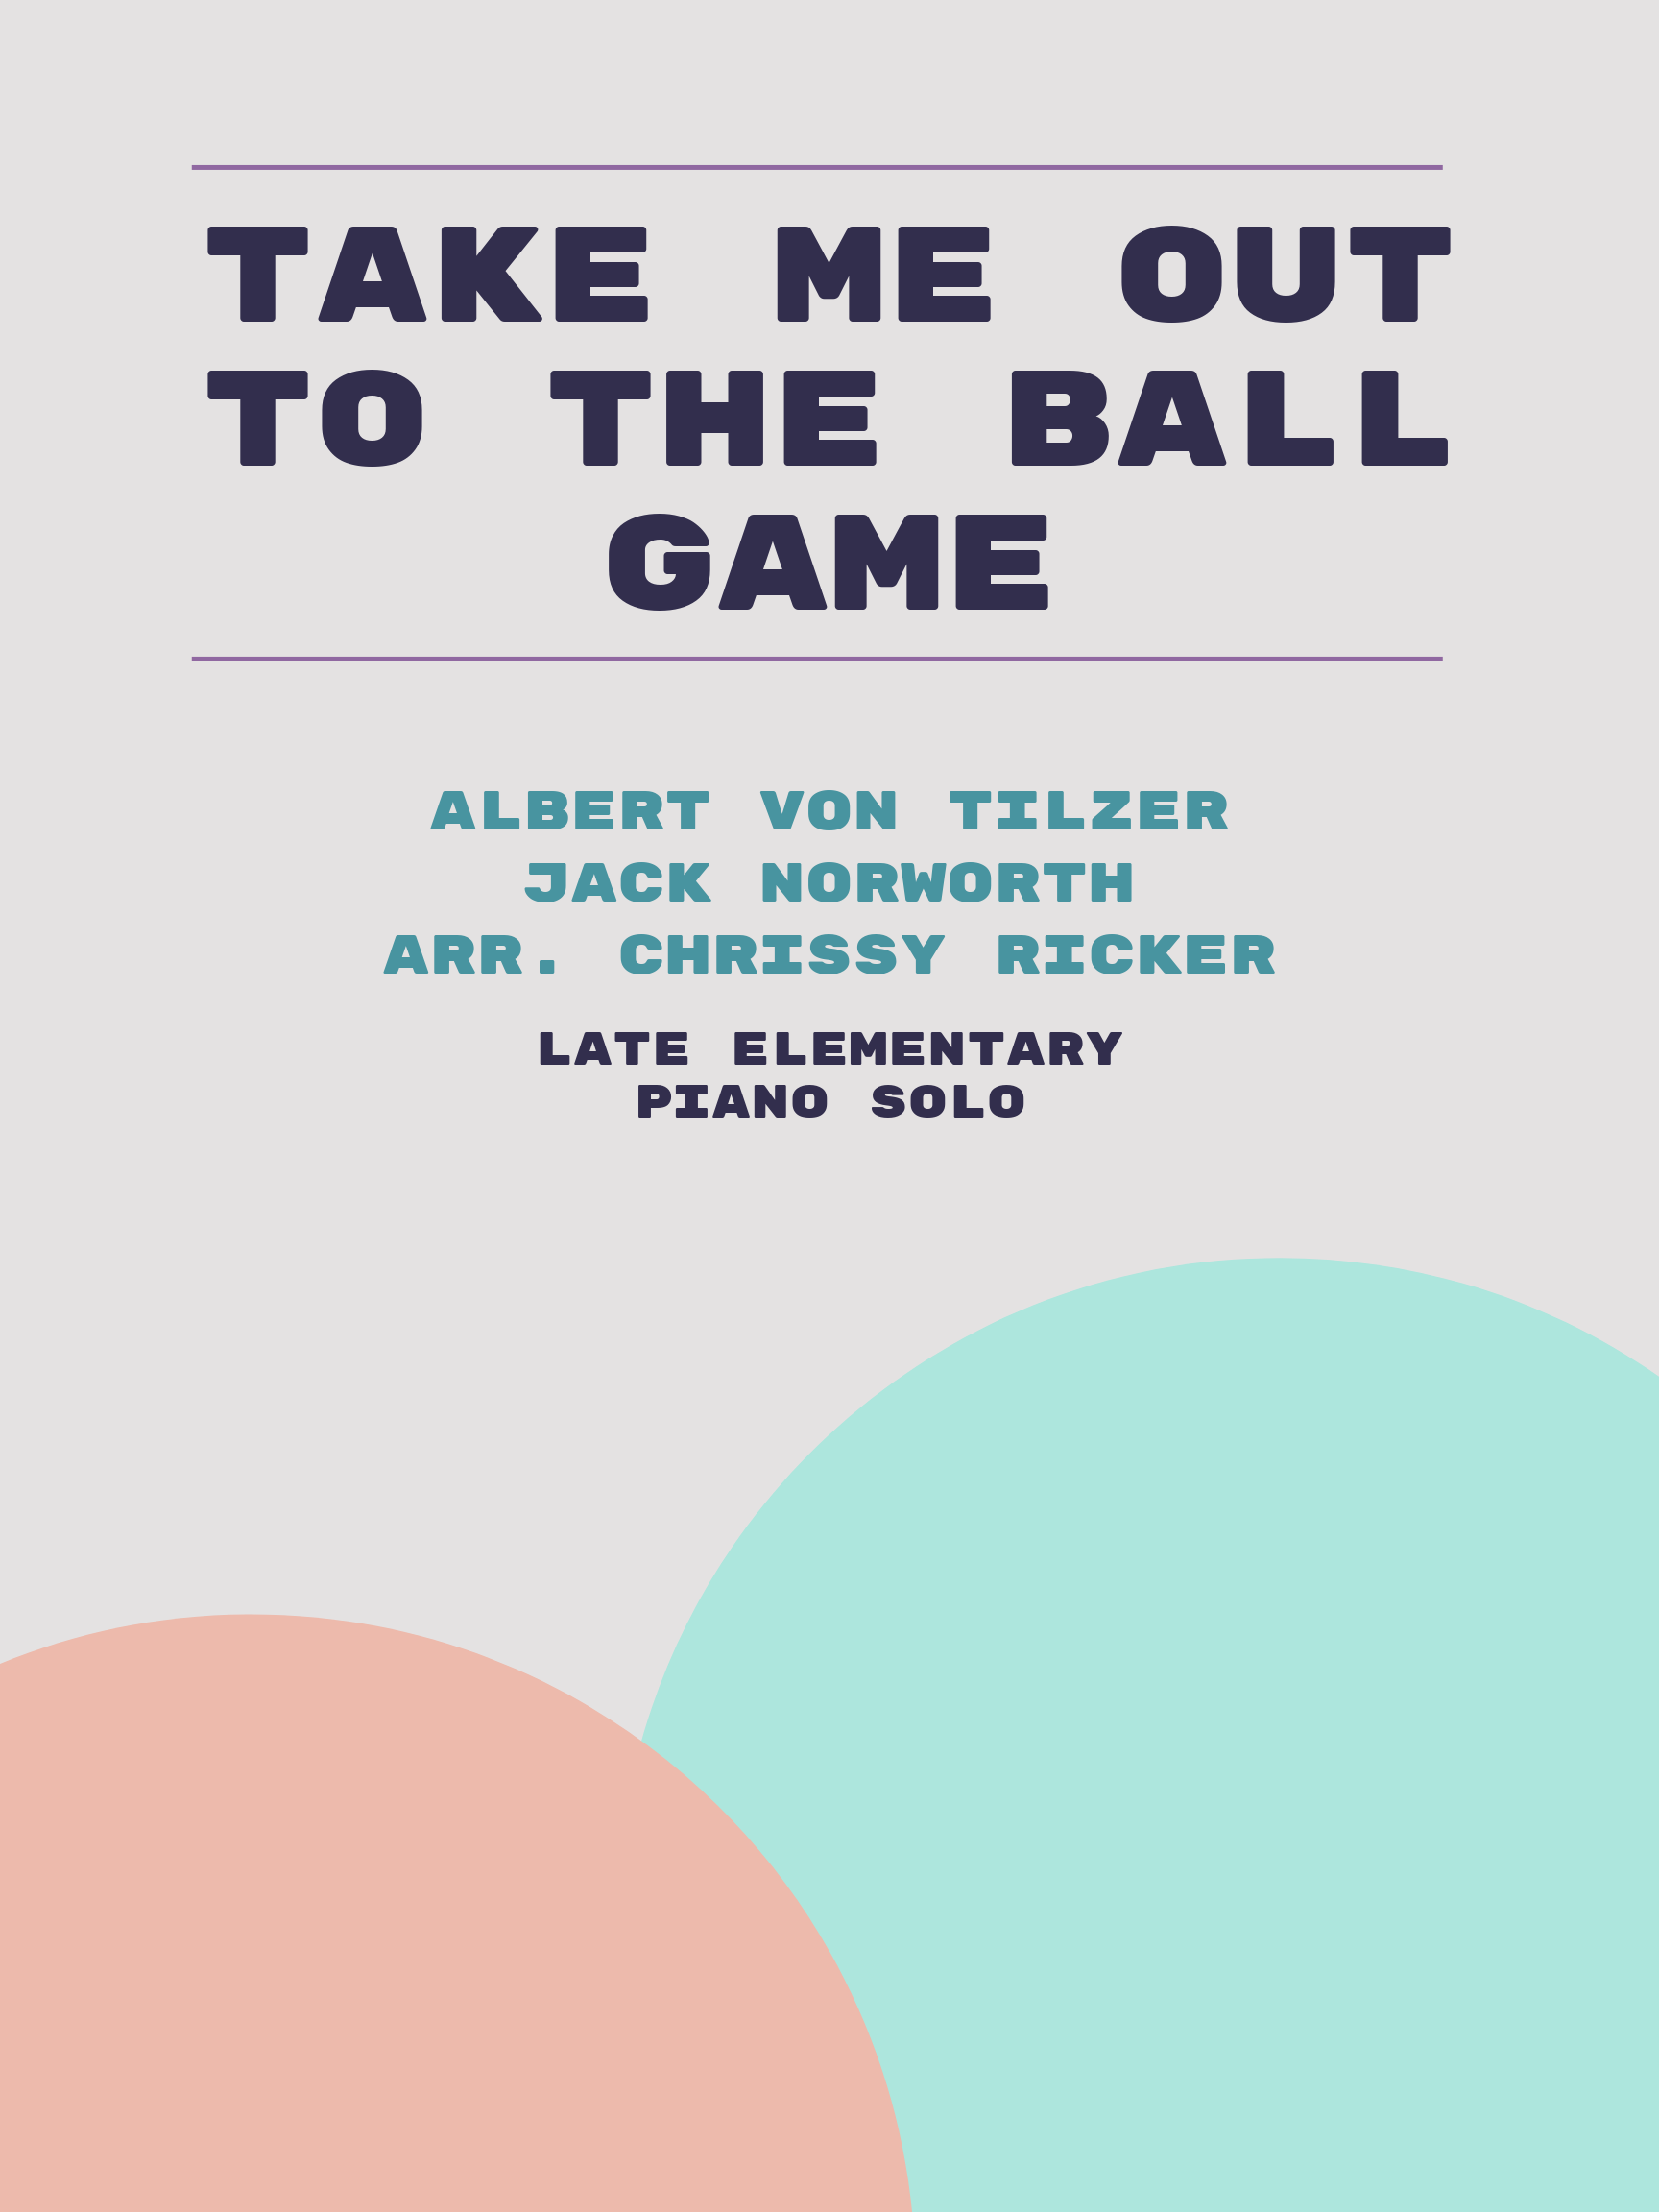 Take Me Out to the Ball Game by Albert Von Tilzer, Jack Norworth